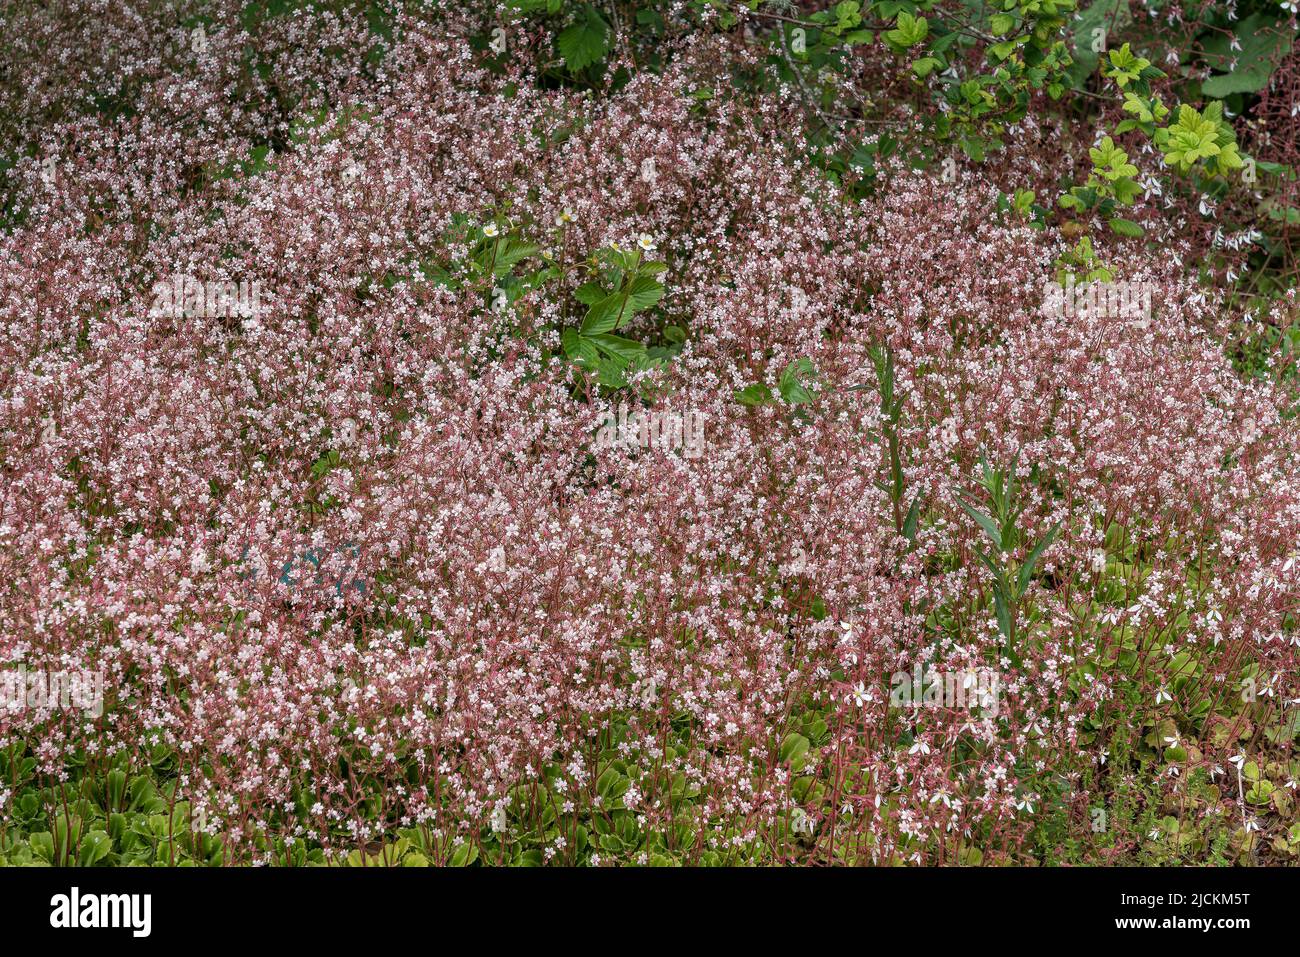 Saxifraga x urbium a summer flowering plant with a pink white summertime flower commonly known as London Pride, stock photo image Stock Photo